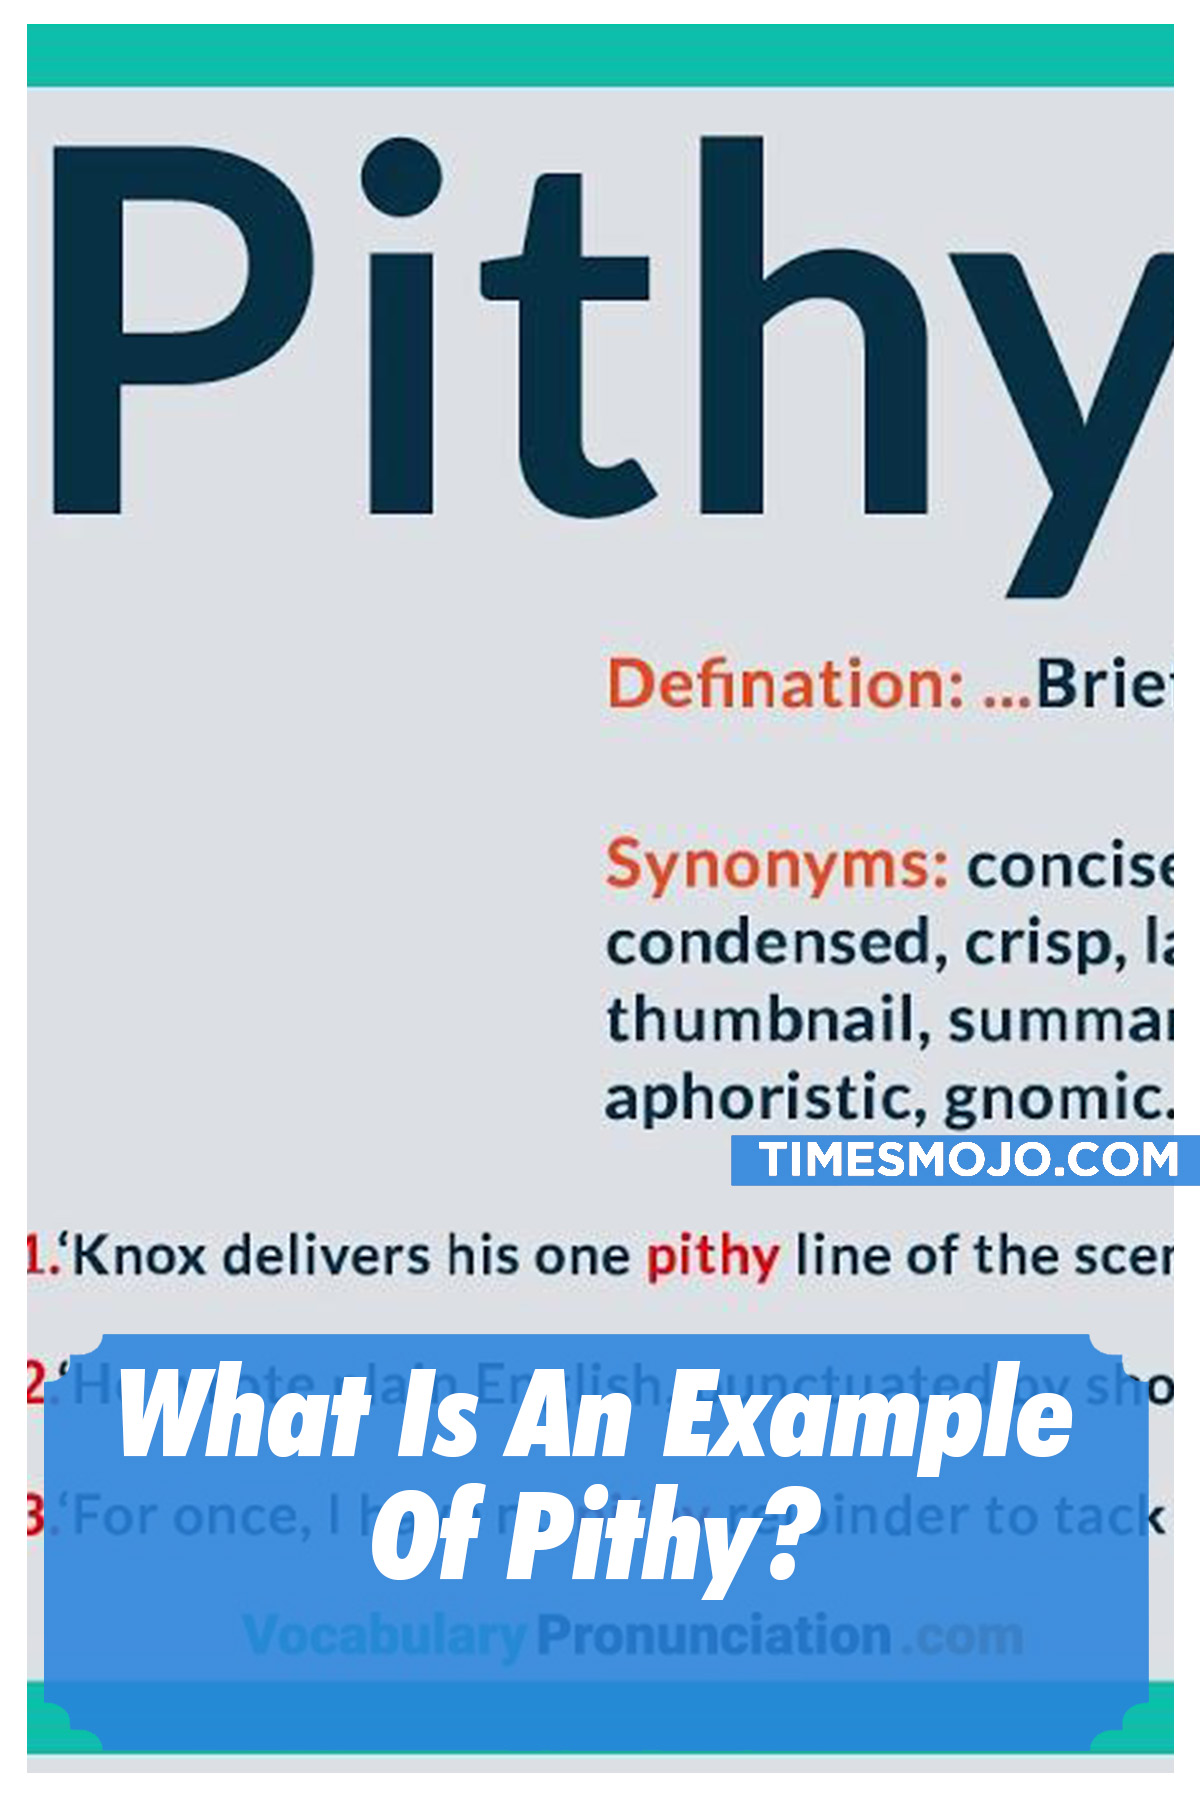 What Is An Example Of Pithy